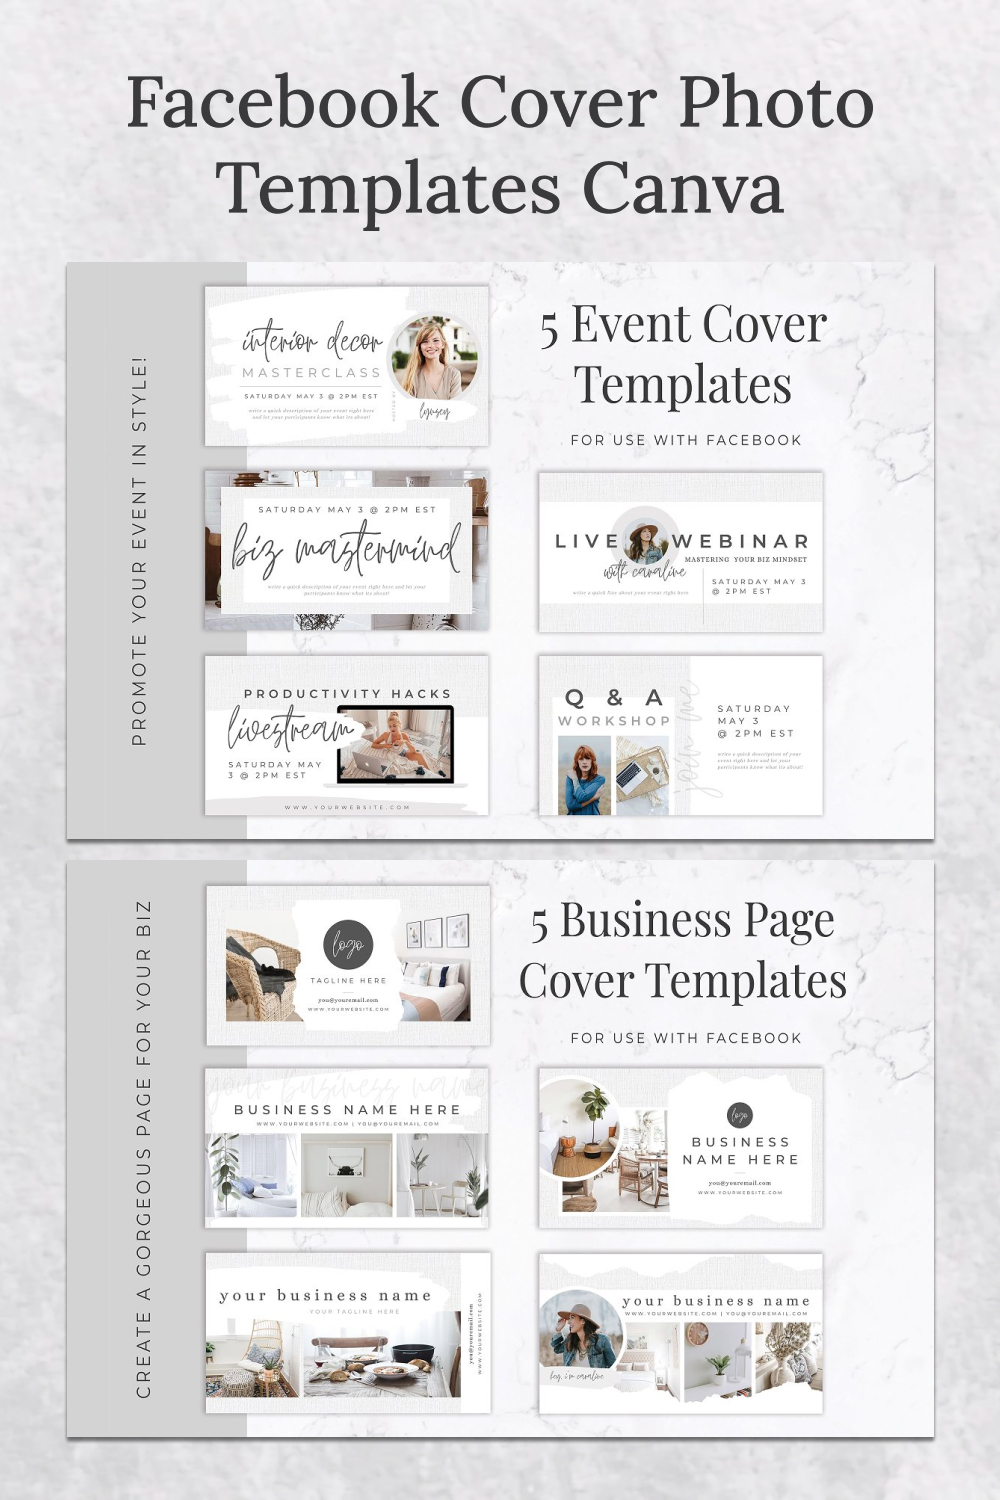 Facebook cover photo templates canva of pinterest.